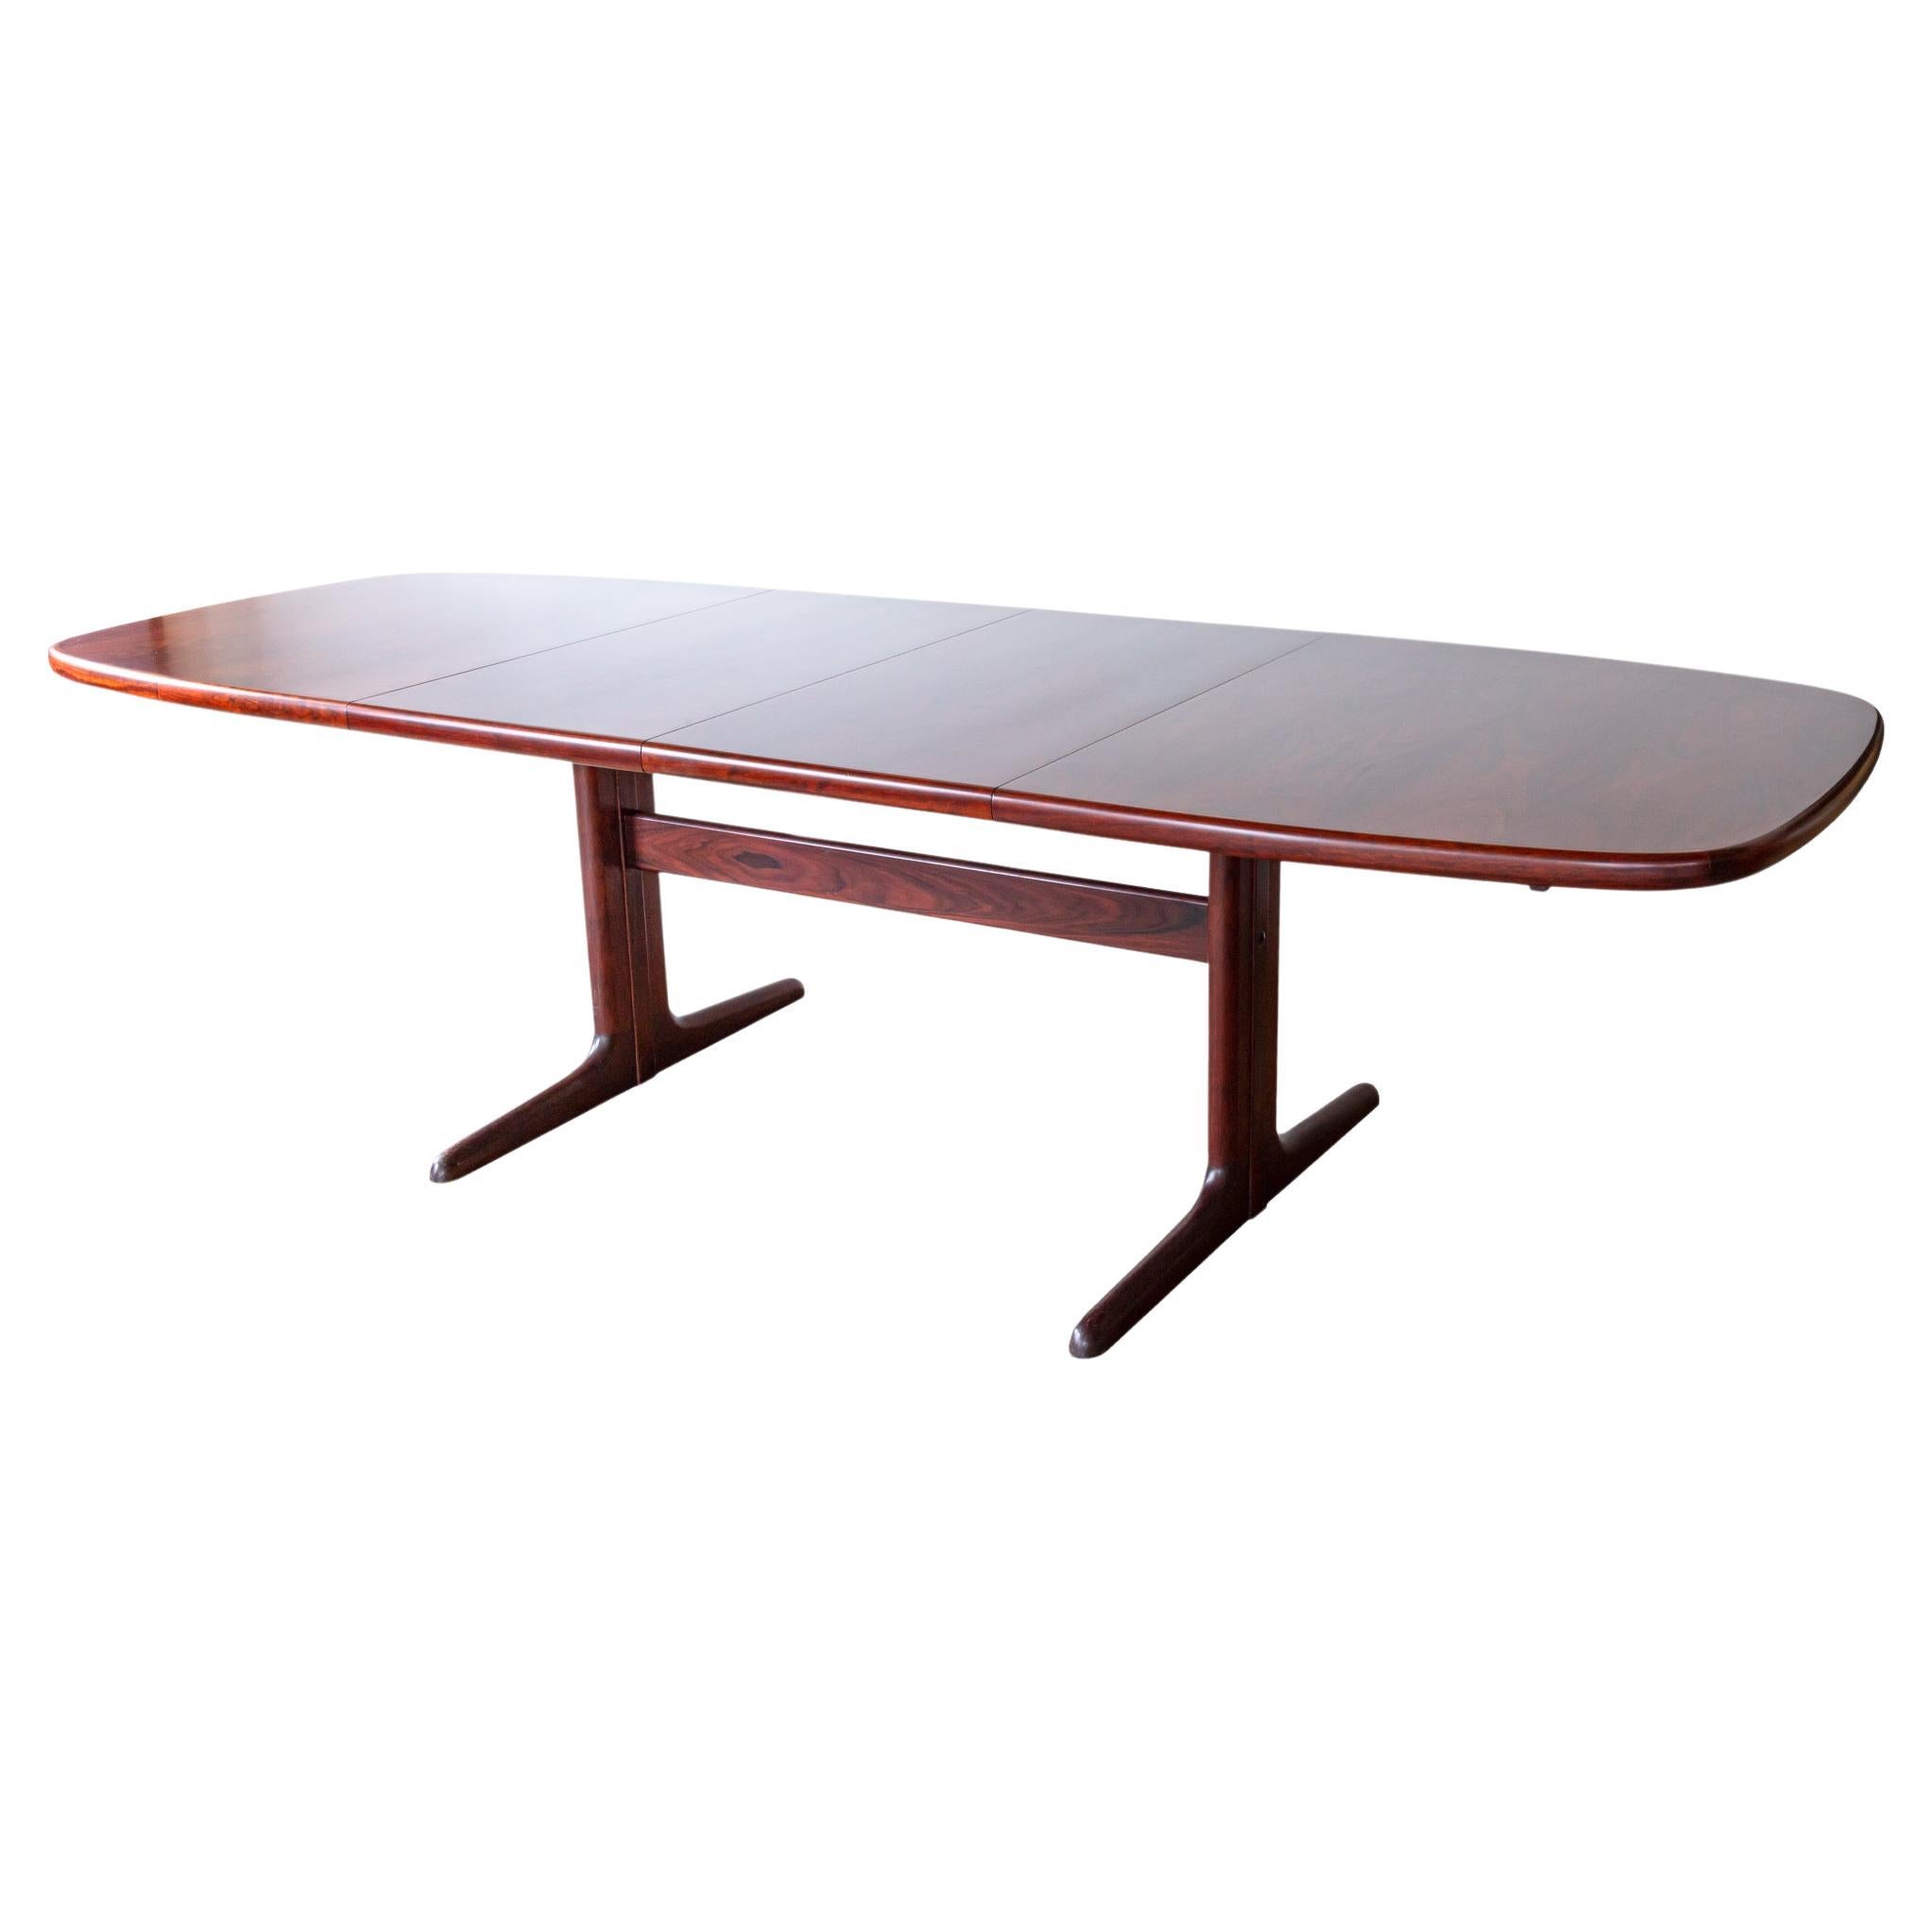 Skovby No 74 Rosewood Danish Dining Table Made in Denmark 1960s Mid Century For Sale